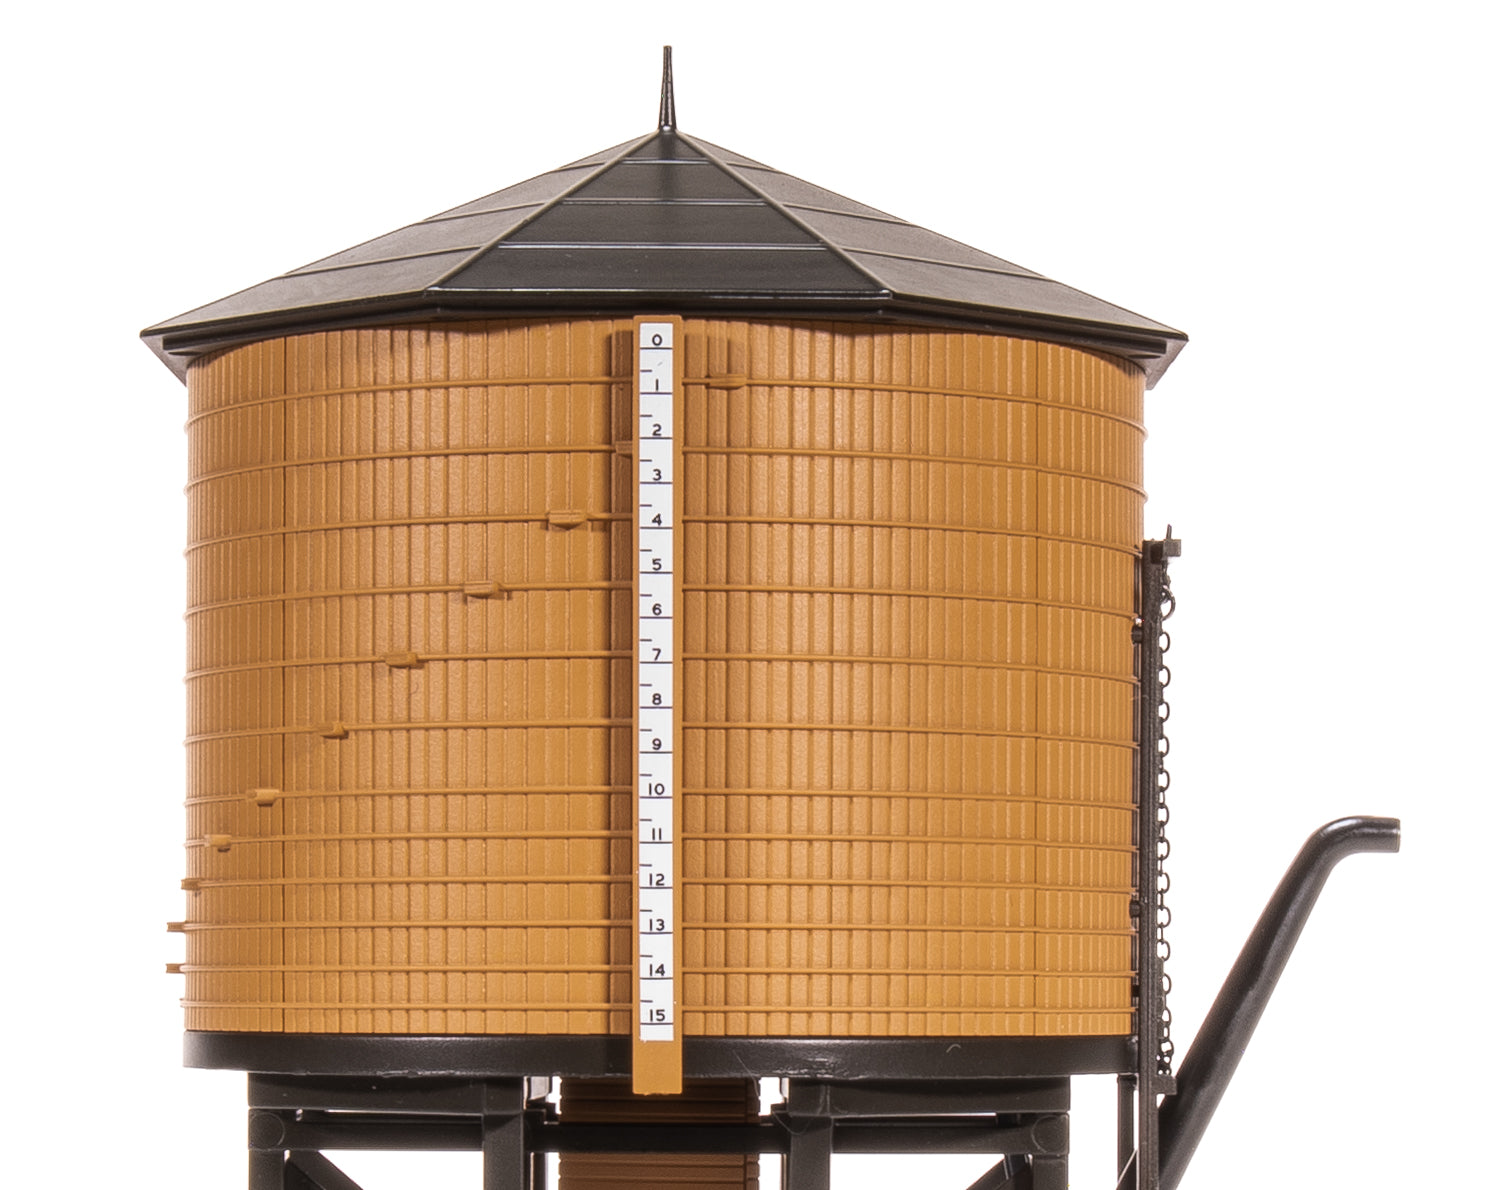 7911 Operating Water Tower w/ Sound, Non-weathered Brown, Unlettered, HO Default Title